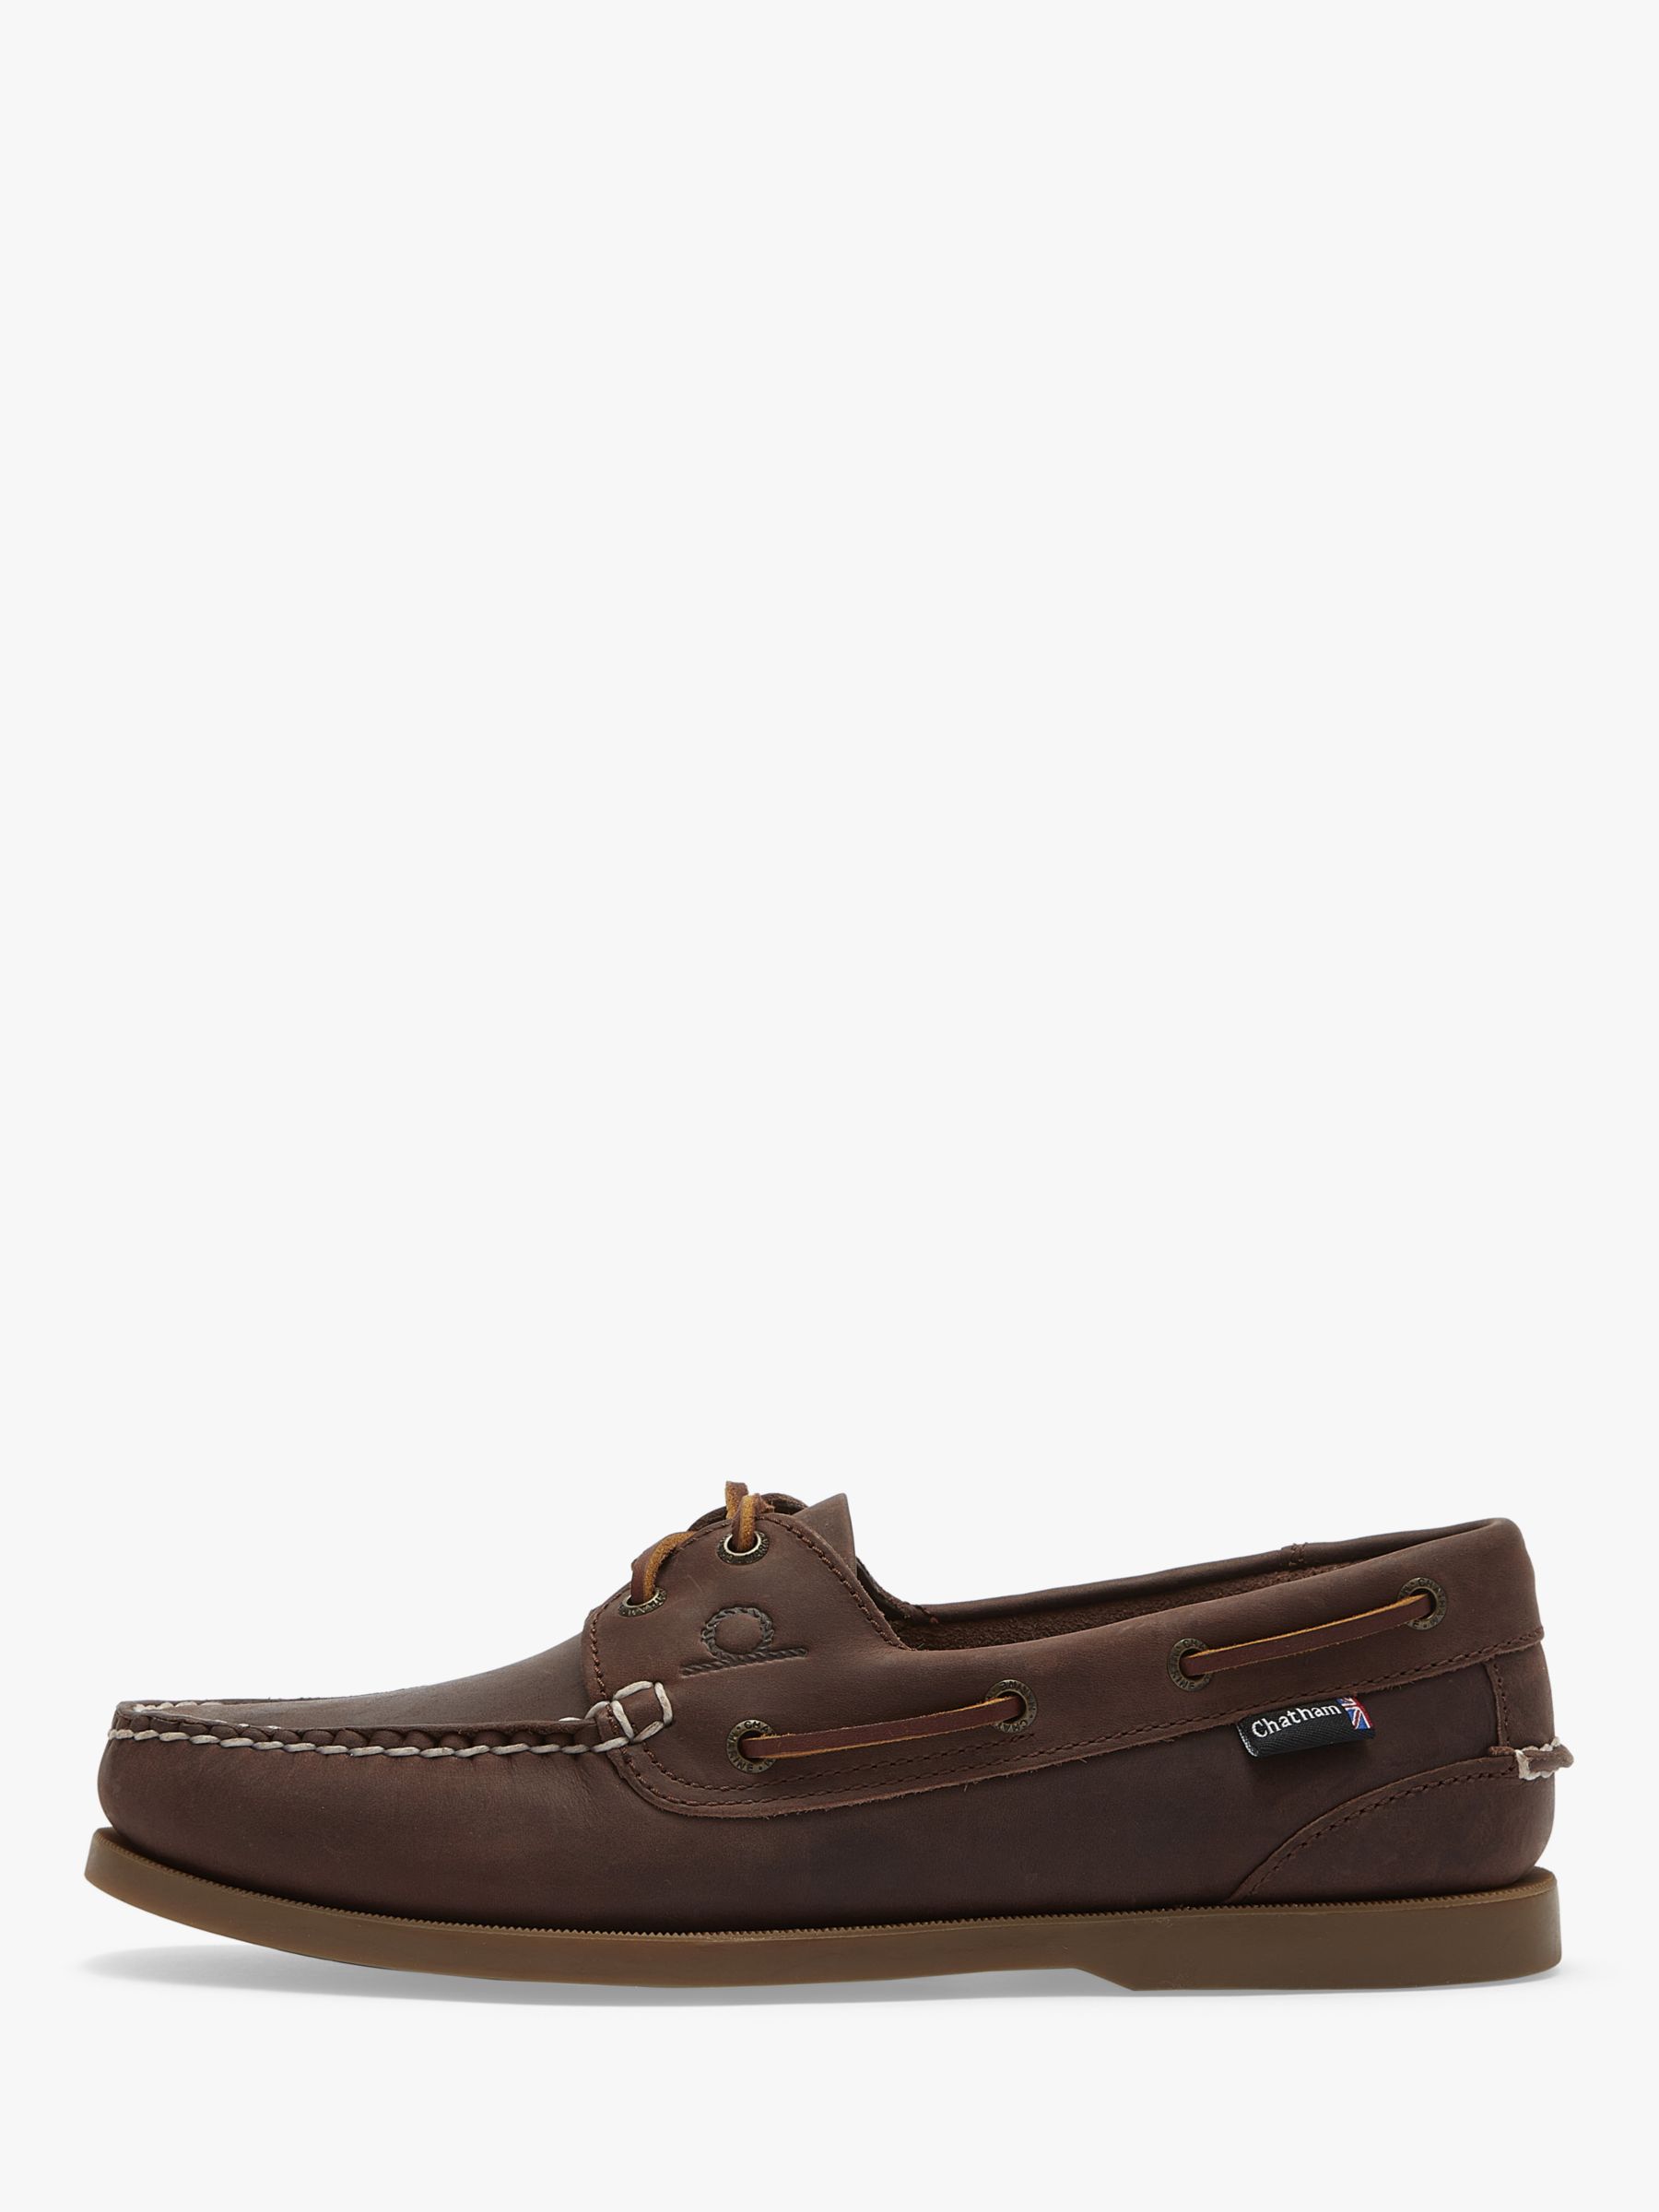 Buy Chatham Deck II G2 Leather Boat Shoes, Chocolate Online at johnlewis.com